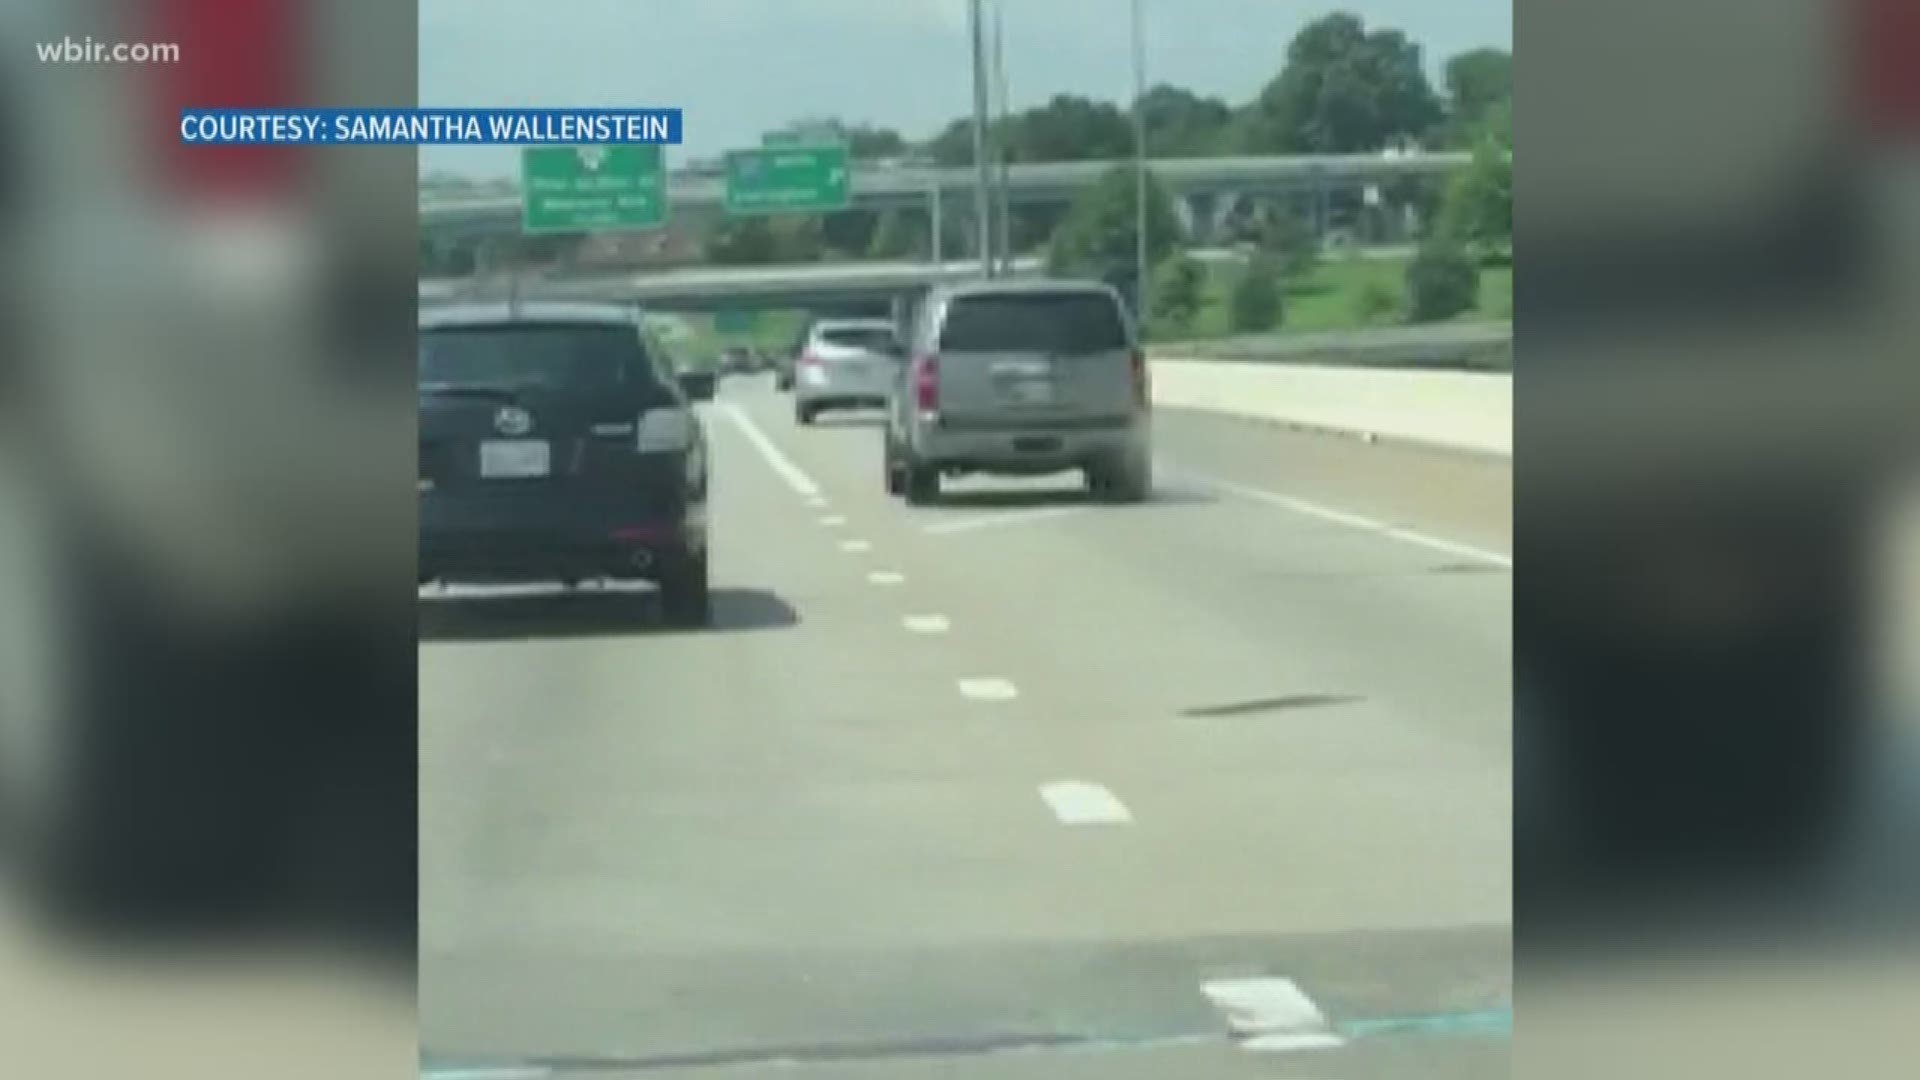 A Knoxville woman says she saw two cats fly out of a SUV's window on I-40 Sunday, claiming they were traveling nearly 60 miles an hour.